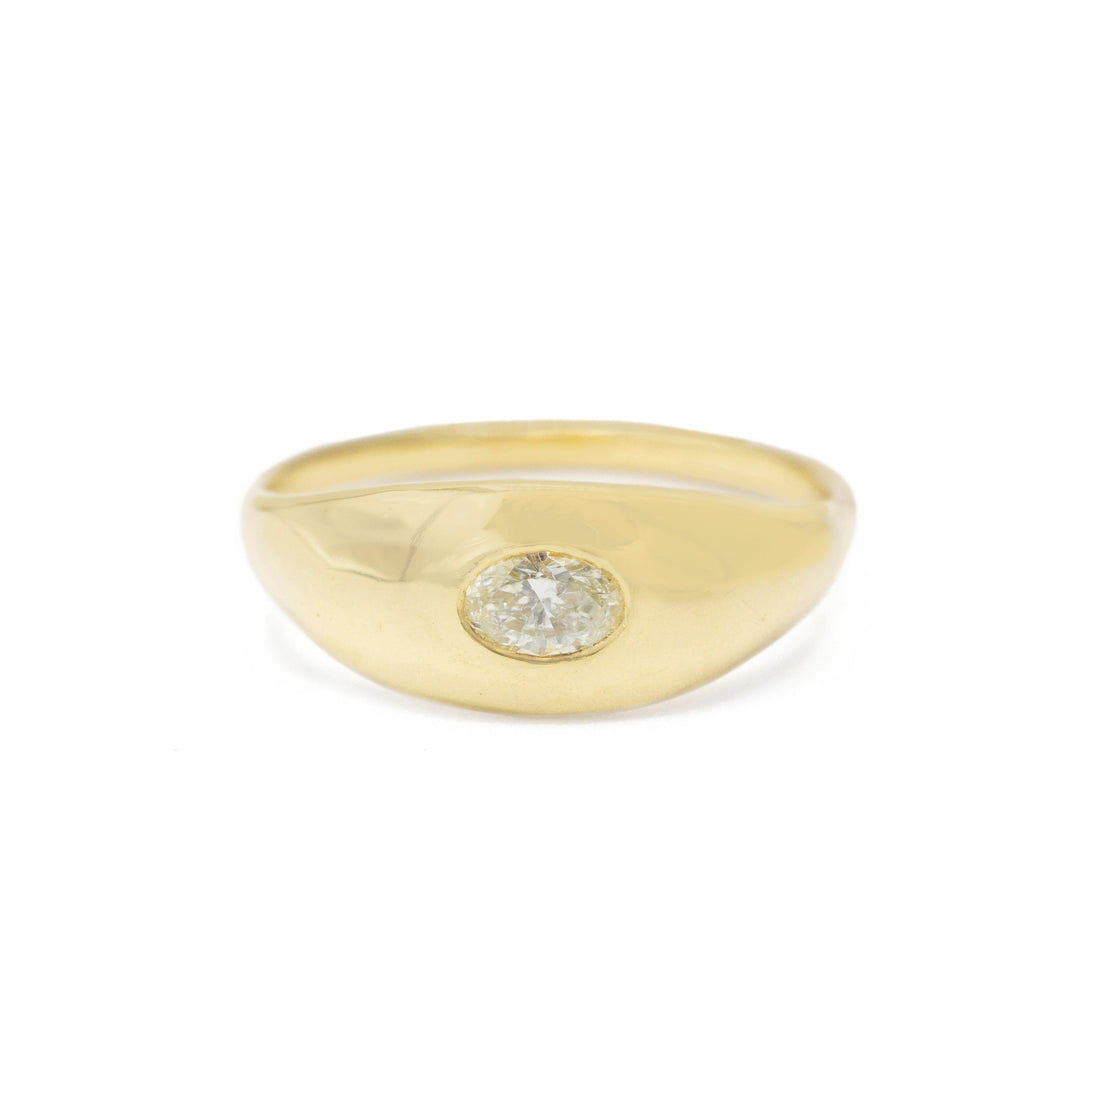 Oval Oasis Solitaire in 18k yellow gold with a yellow diamond by Erin Cuff Jewelry.